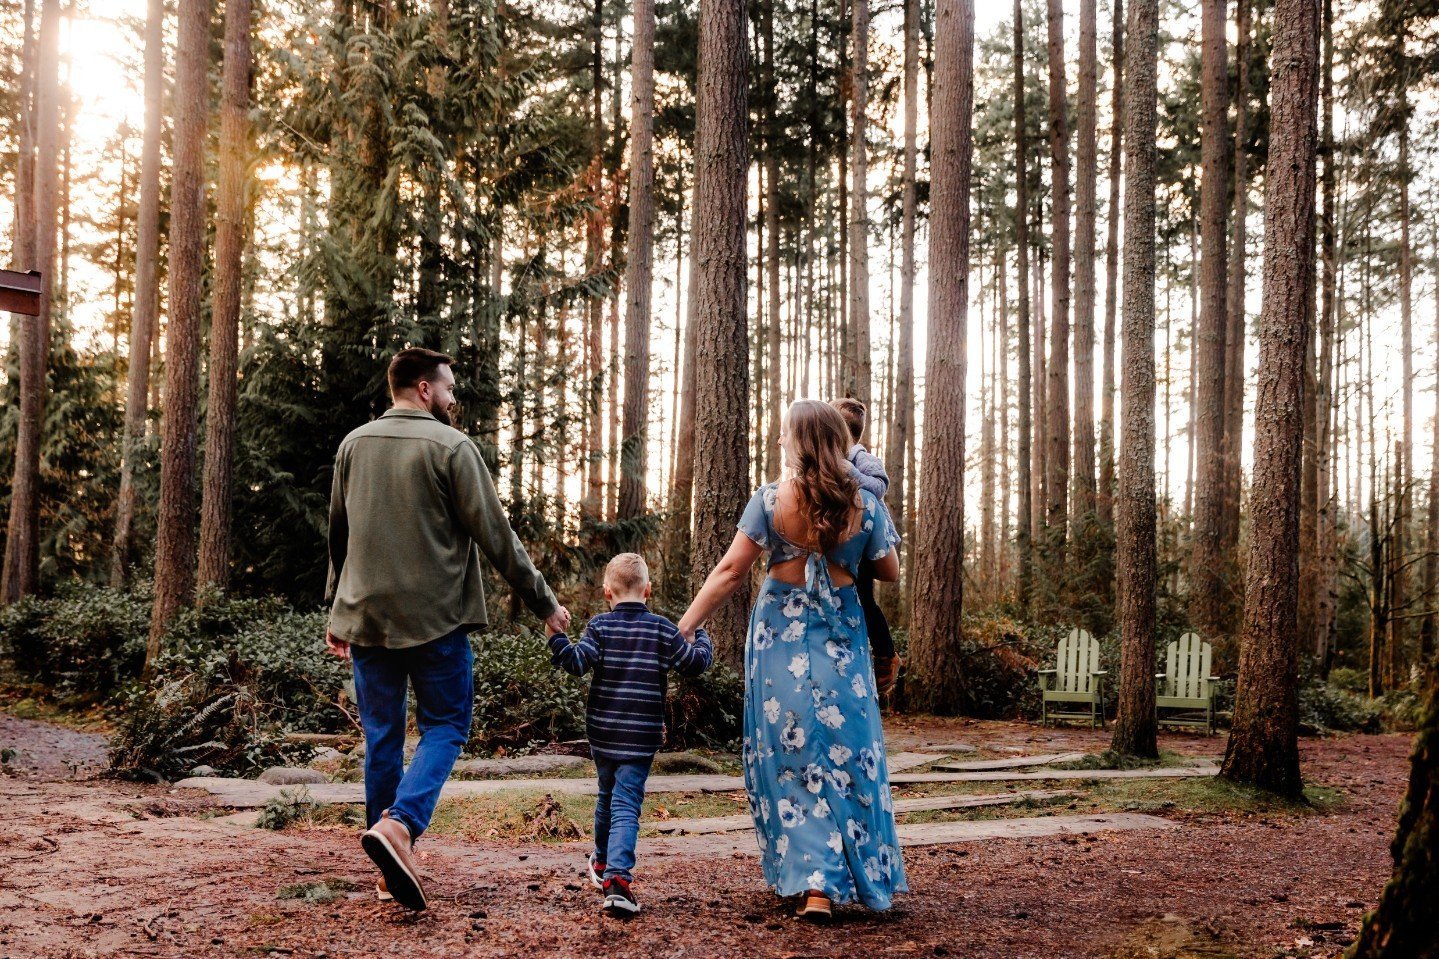 Let's get lost in nature together! 

Beautiful photographs happen in beautiful locations and the Pacific Northwest is full of them!

#bonneylakephotographer #seattlefamilyphotographer #tacomaphotographer #seattlefamilyphotos #lifestylefamilyphotograp